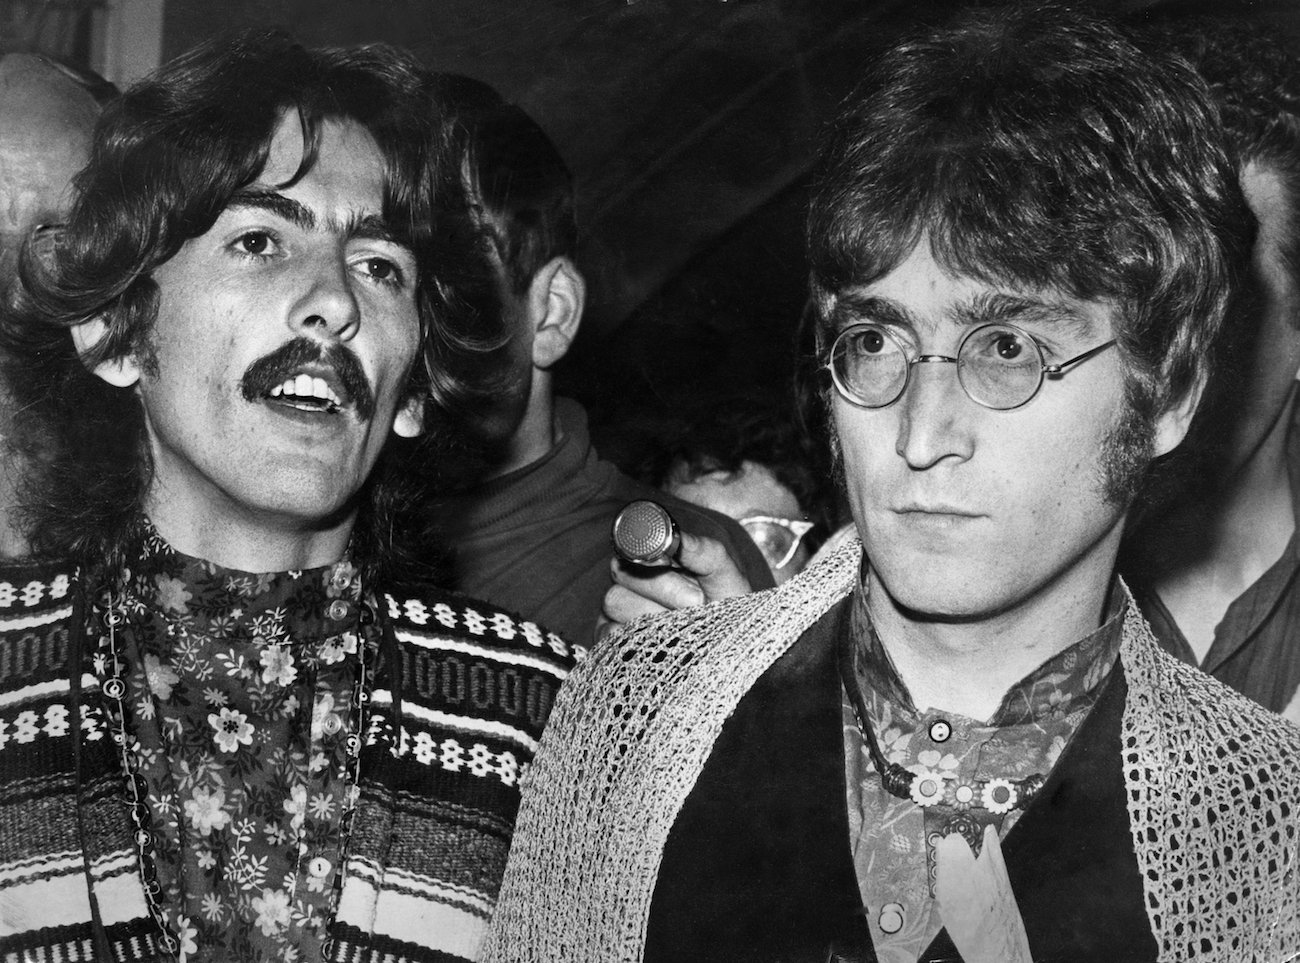 George Harrison and John Lennon talking at a press conference in Bangor following the death of their manager, Brian Epstein, 1967.